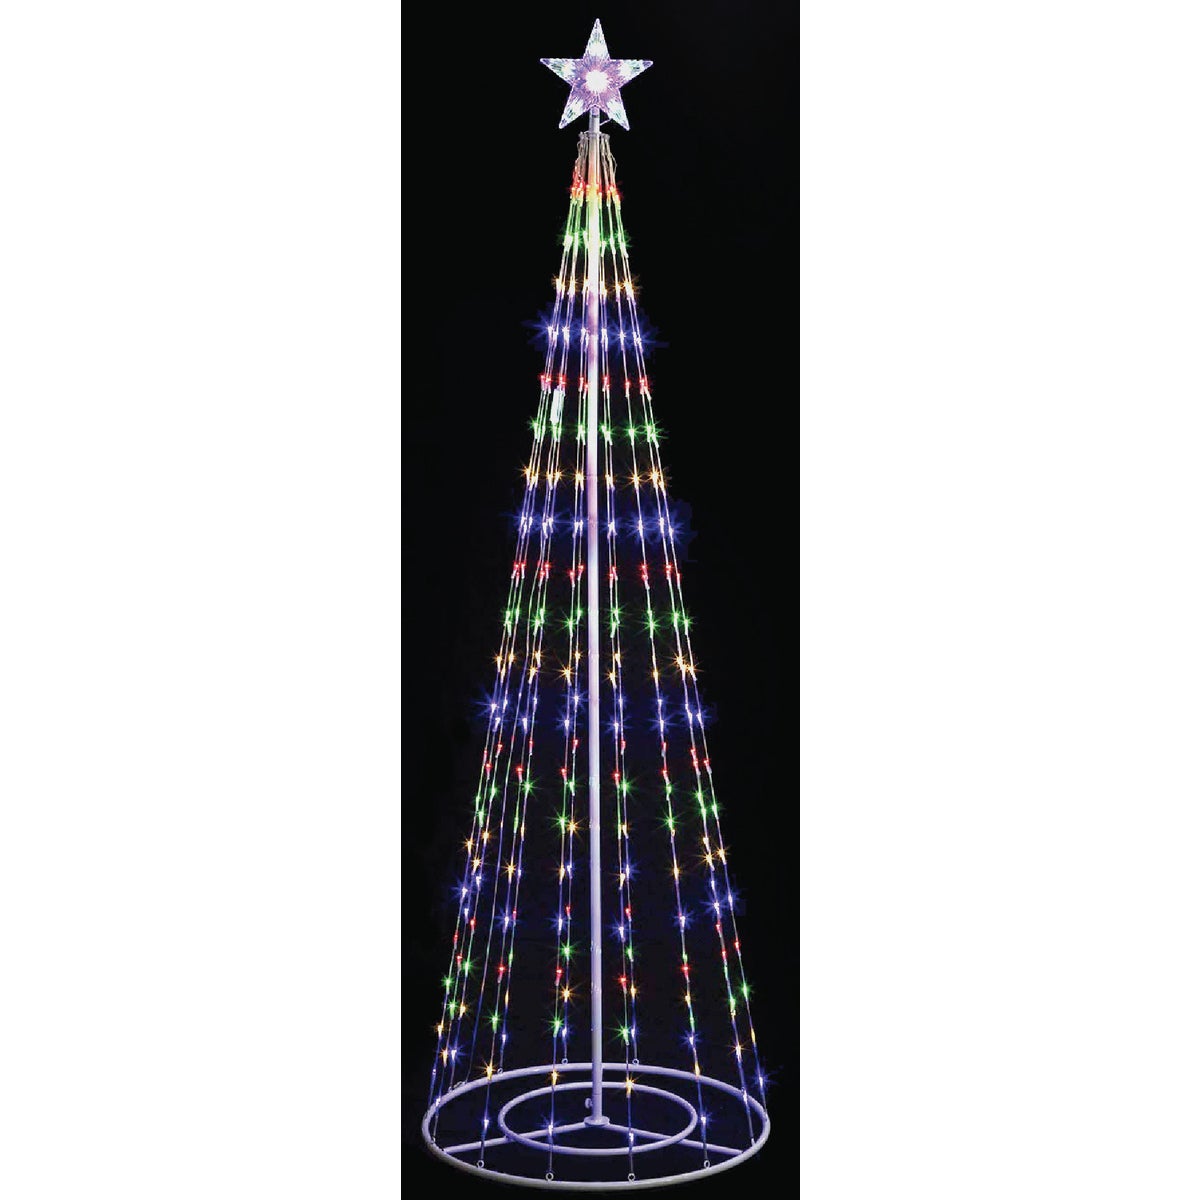 Item 900219, Outdoor LED (light emitting diode) Christmas tree tower.